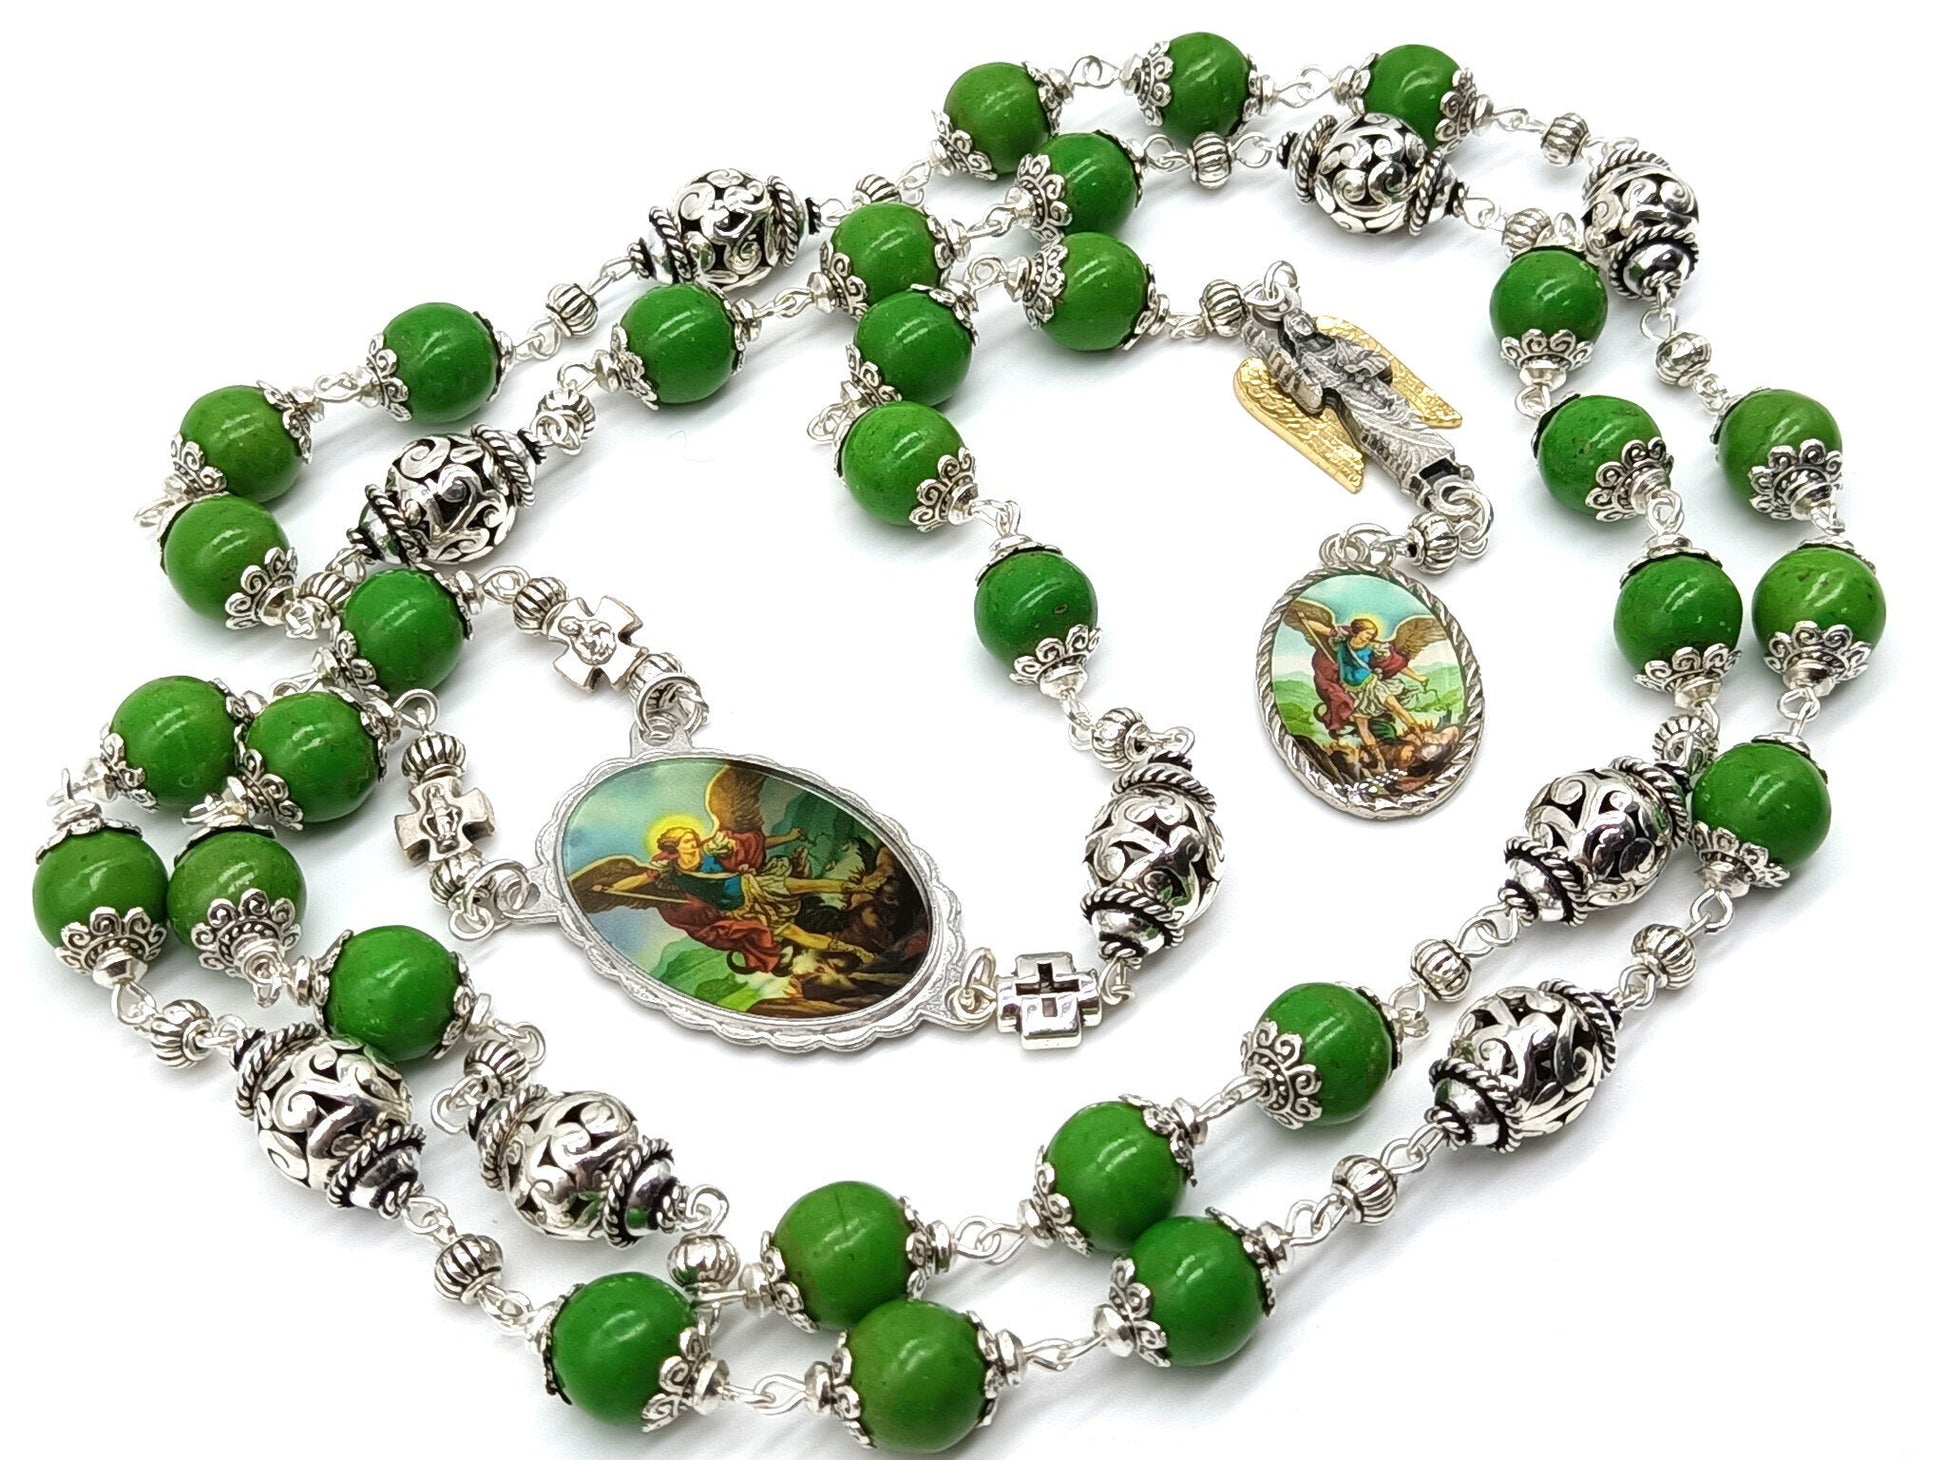 Saint Michael unique rosary beads prayer chaplet with green gemstone beads and silver picture medals, angel medal and silver bead caps.